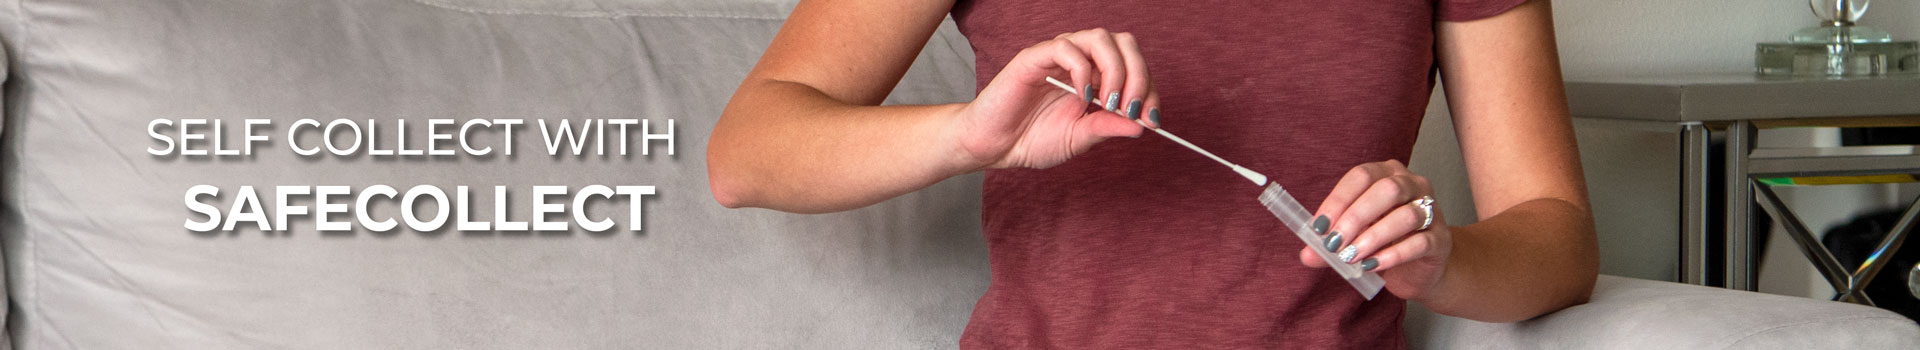 Image of a person placing the SafeCollect swab into the collection tube